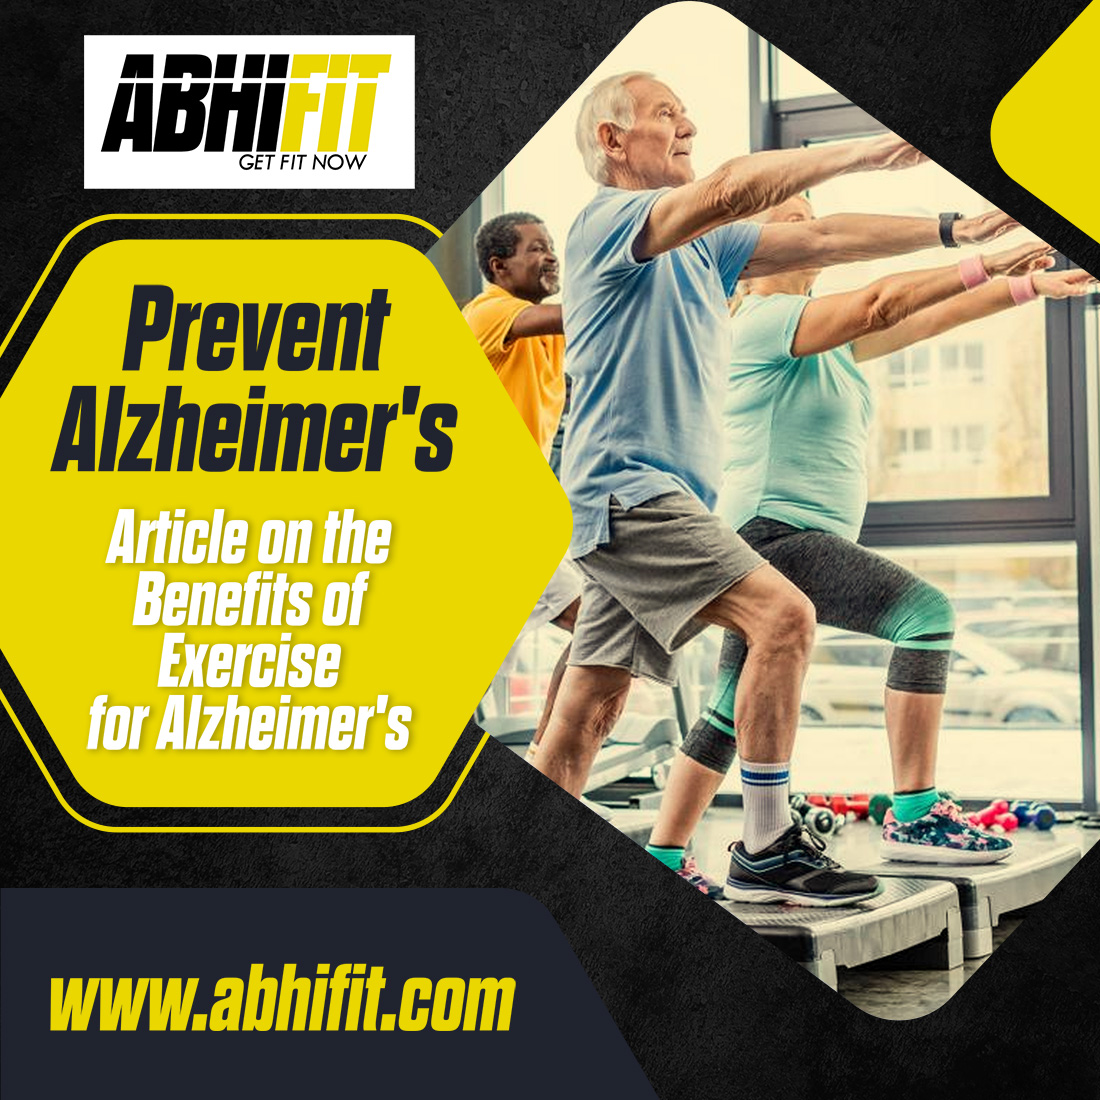 Benefits of Exercise for Alzheimers by Best Personal Trainer in Dubai UAE Abhinav Malhotra AbhiFit